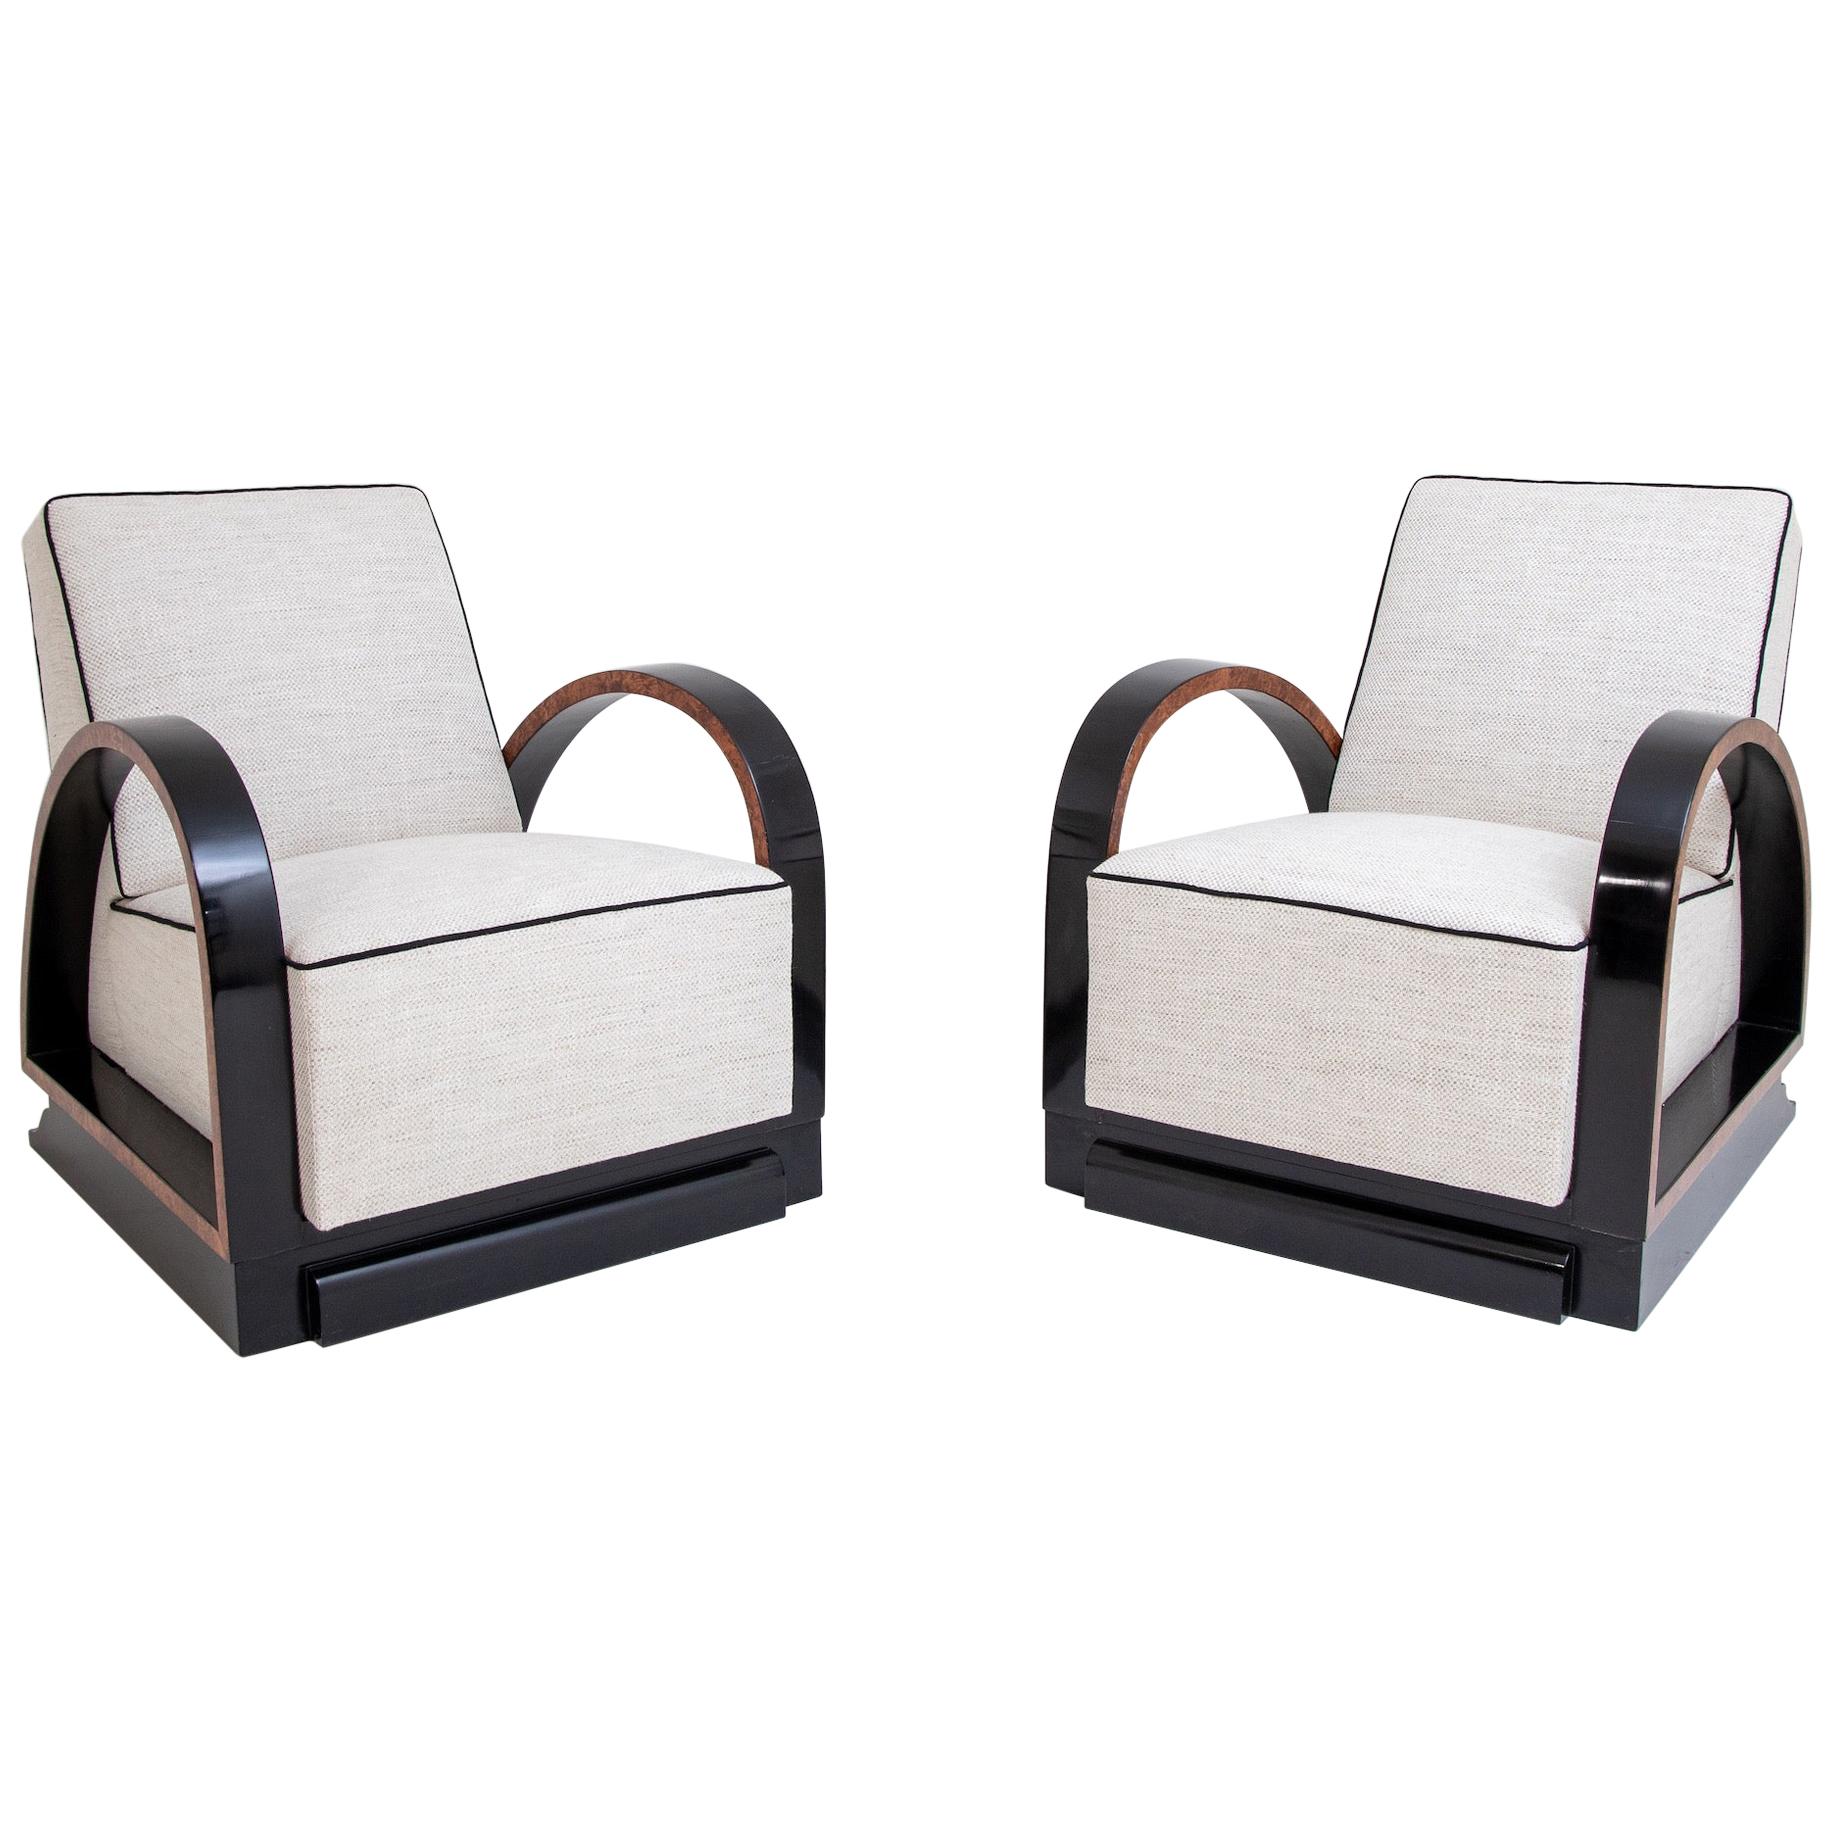 Pair of Art Deco Lounge Chairs, France, 1920s